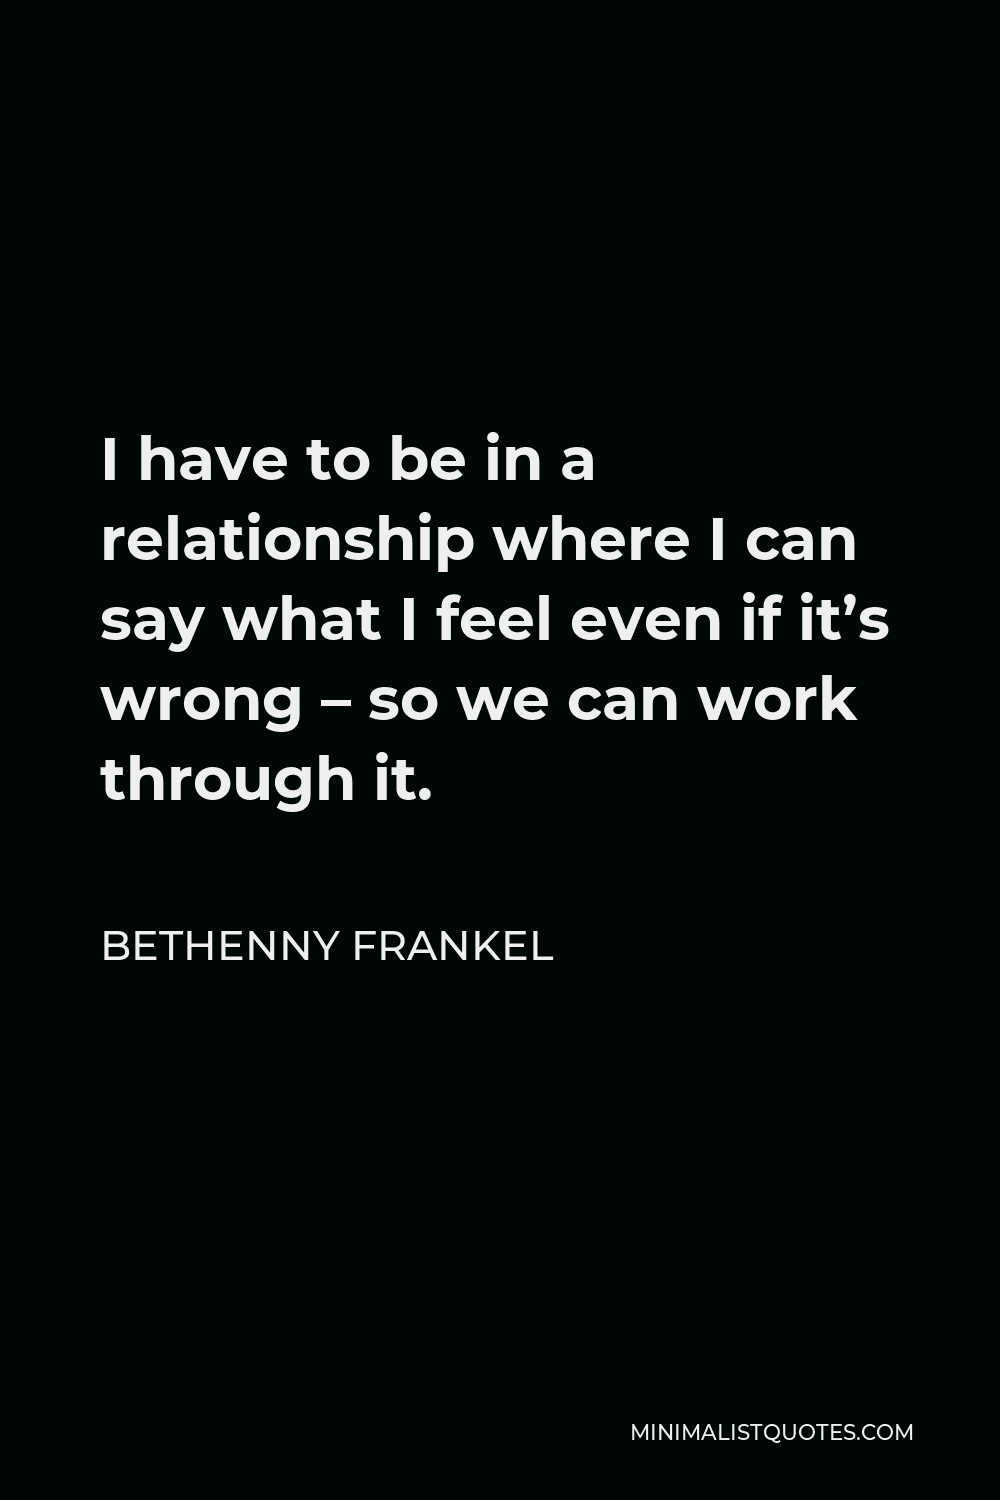 Bethenny Frankel Quote - I have to be in a relationship where I can say what I feel even if it’s wrong – so we can work through it.